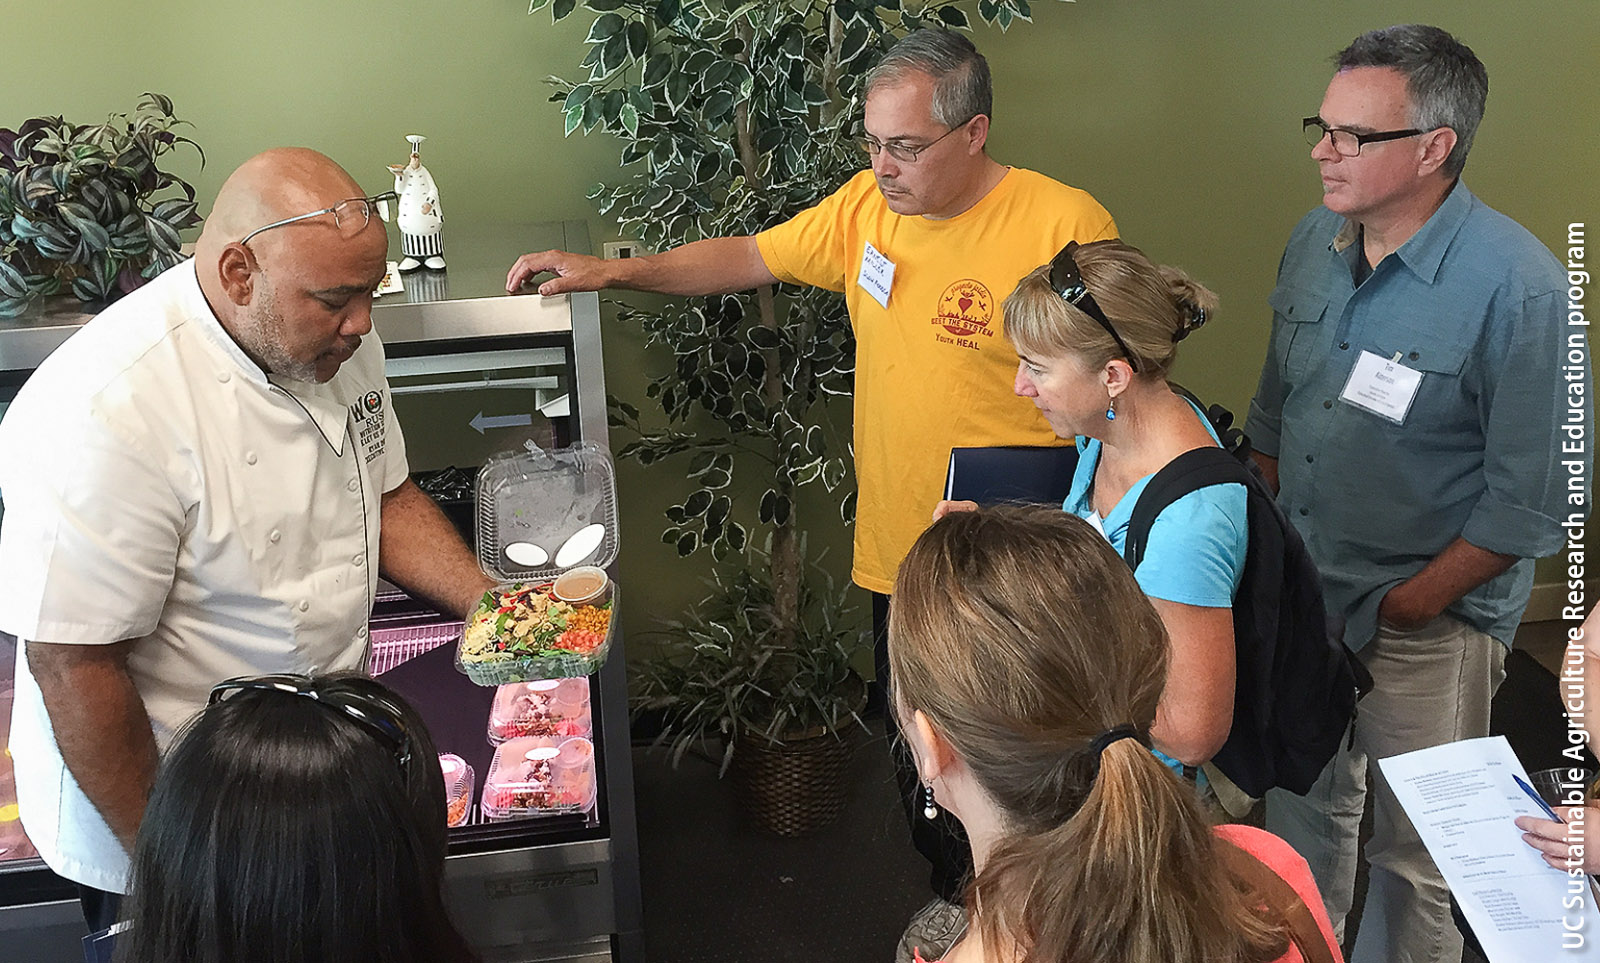 On an educational tour for elected officials and government staff, a food service director explains the contents of a grab-and-go salad for students.